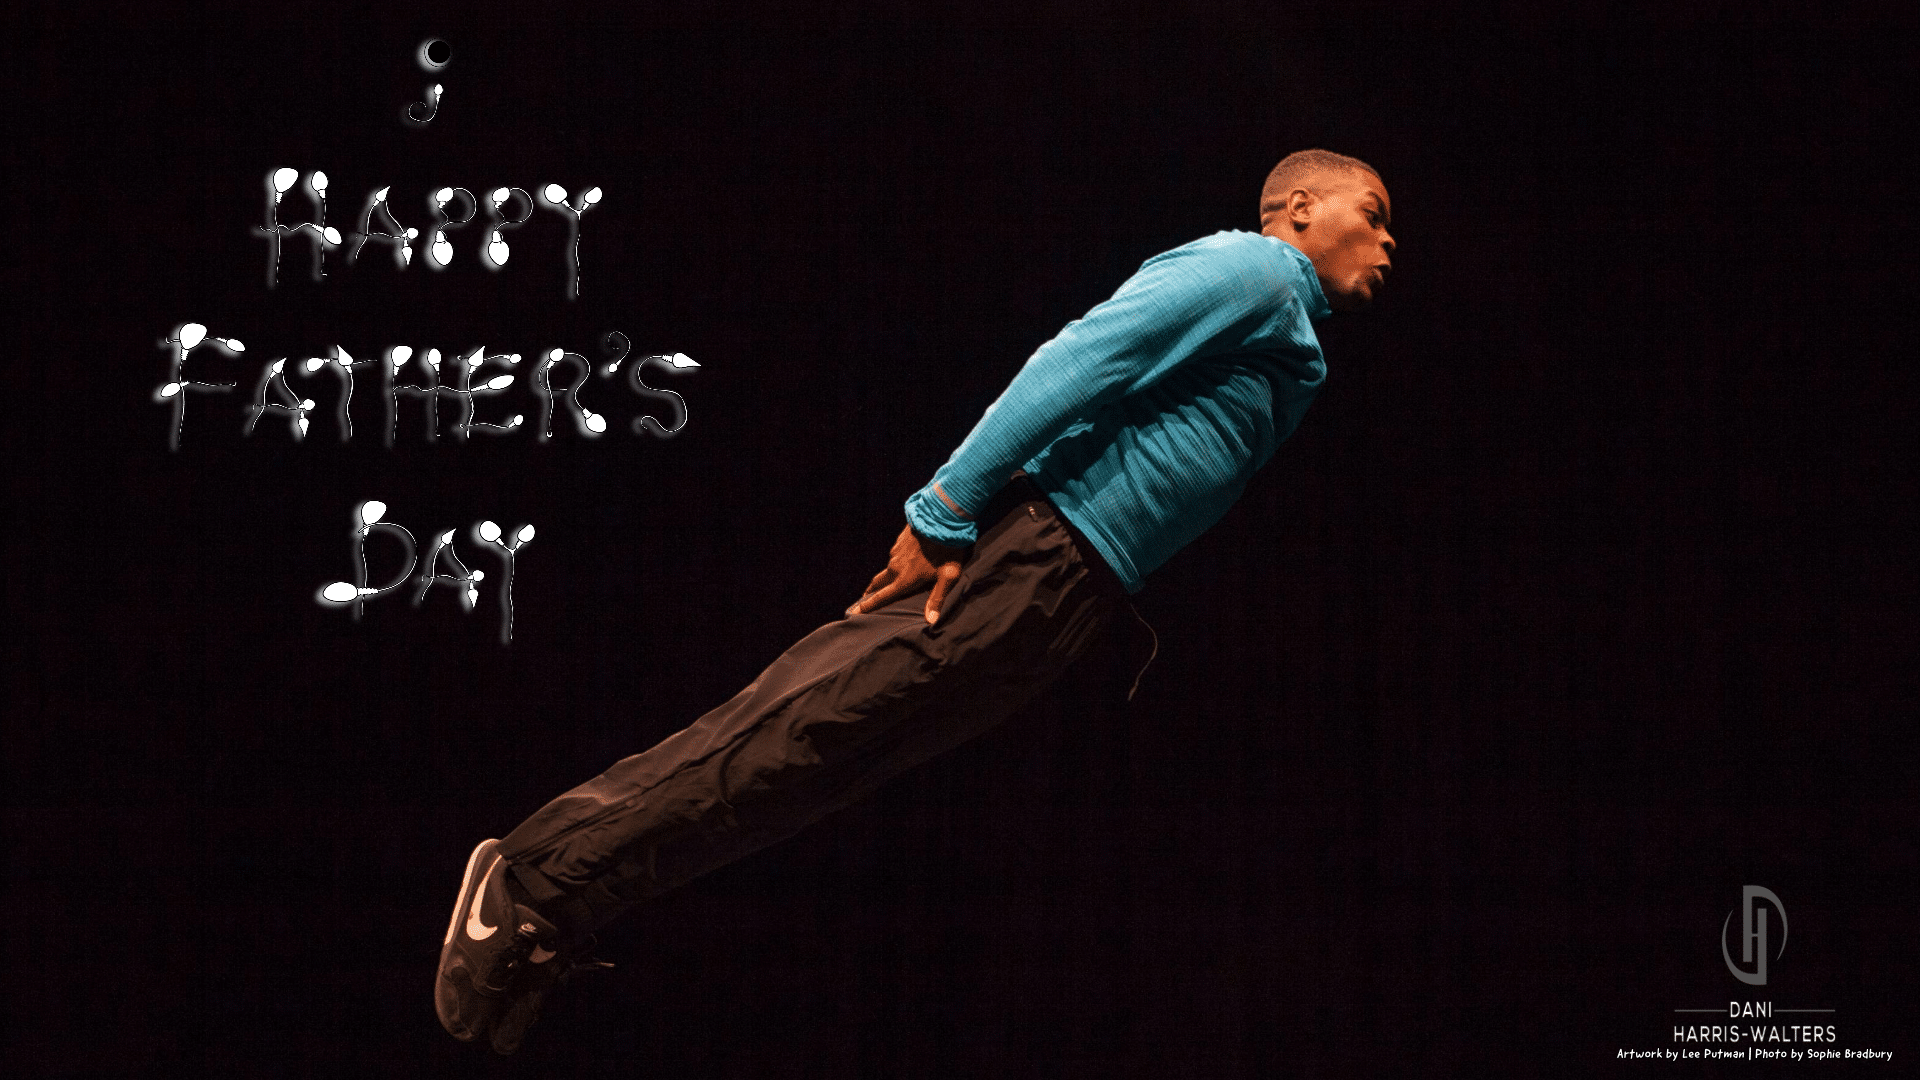 Happy Father's Day artwork. Black background. Dani Harris-Walters (a young black man wearing a blue jumpers and black trousers) forms a straight line with his body, arms by his sides. He is tilted at a diagonal angle. In the top left corner, text that is formed out of illustrated sperm reads 'Happy Father's Day'.